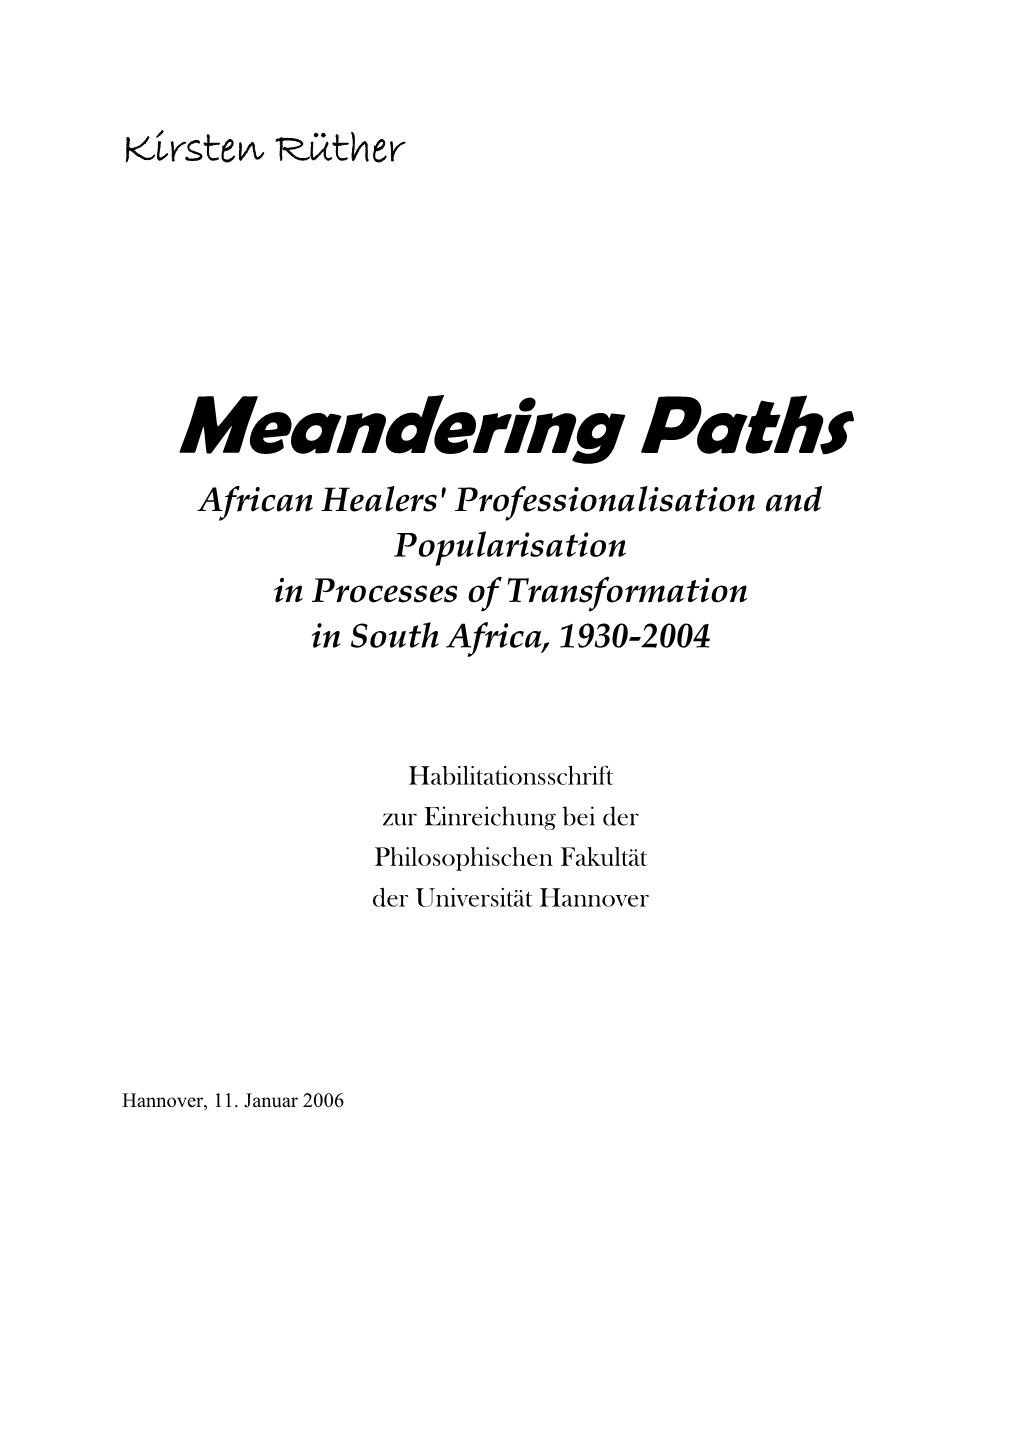 Meandering Paths African Healers' Professionalisation and Popularisation in Processes of Transformation in South Africa, 1930-2004